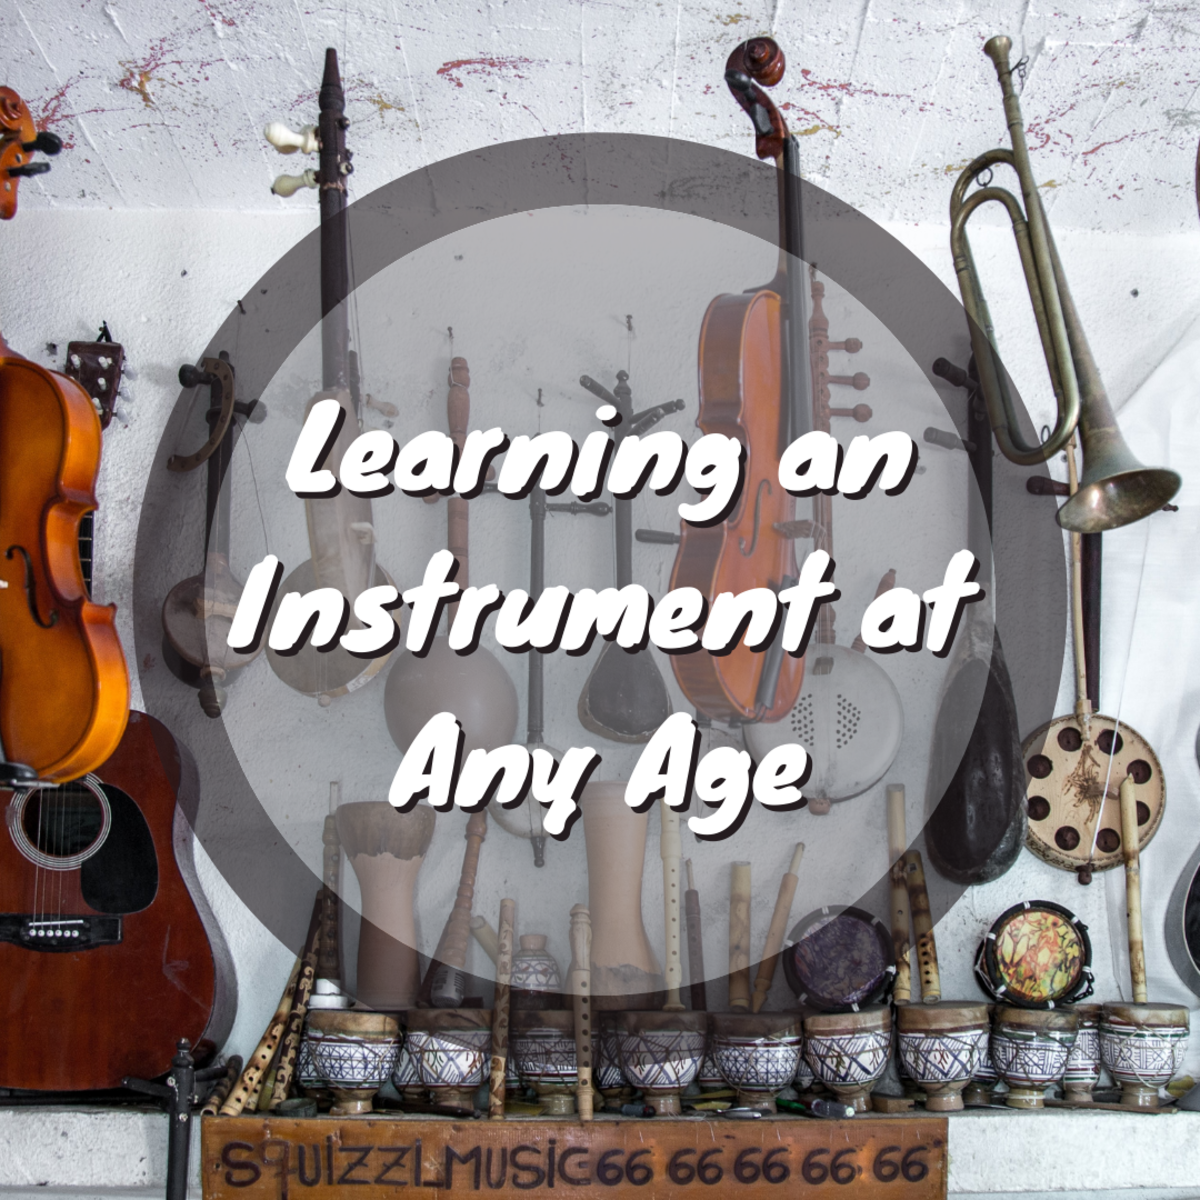 This article provides insight and advice for music students of all ages who are learning and mastering an instrument. It also provides helpful info for parents of children learners and tips for teens and adults to improve and remain motivated.